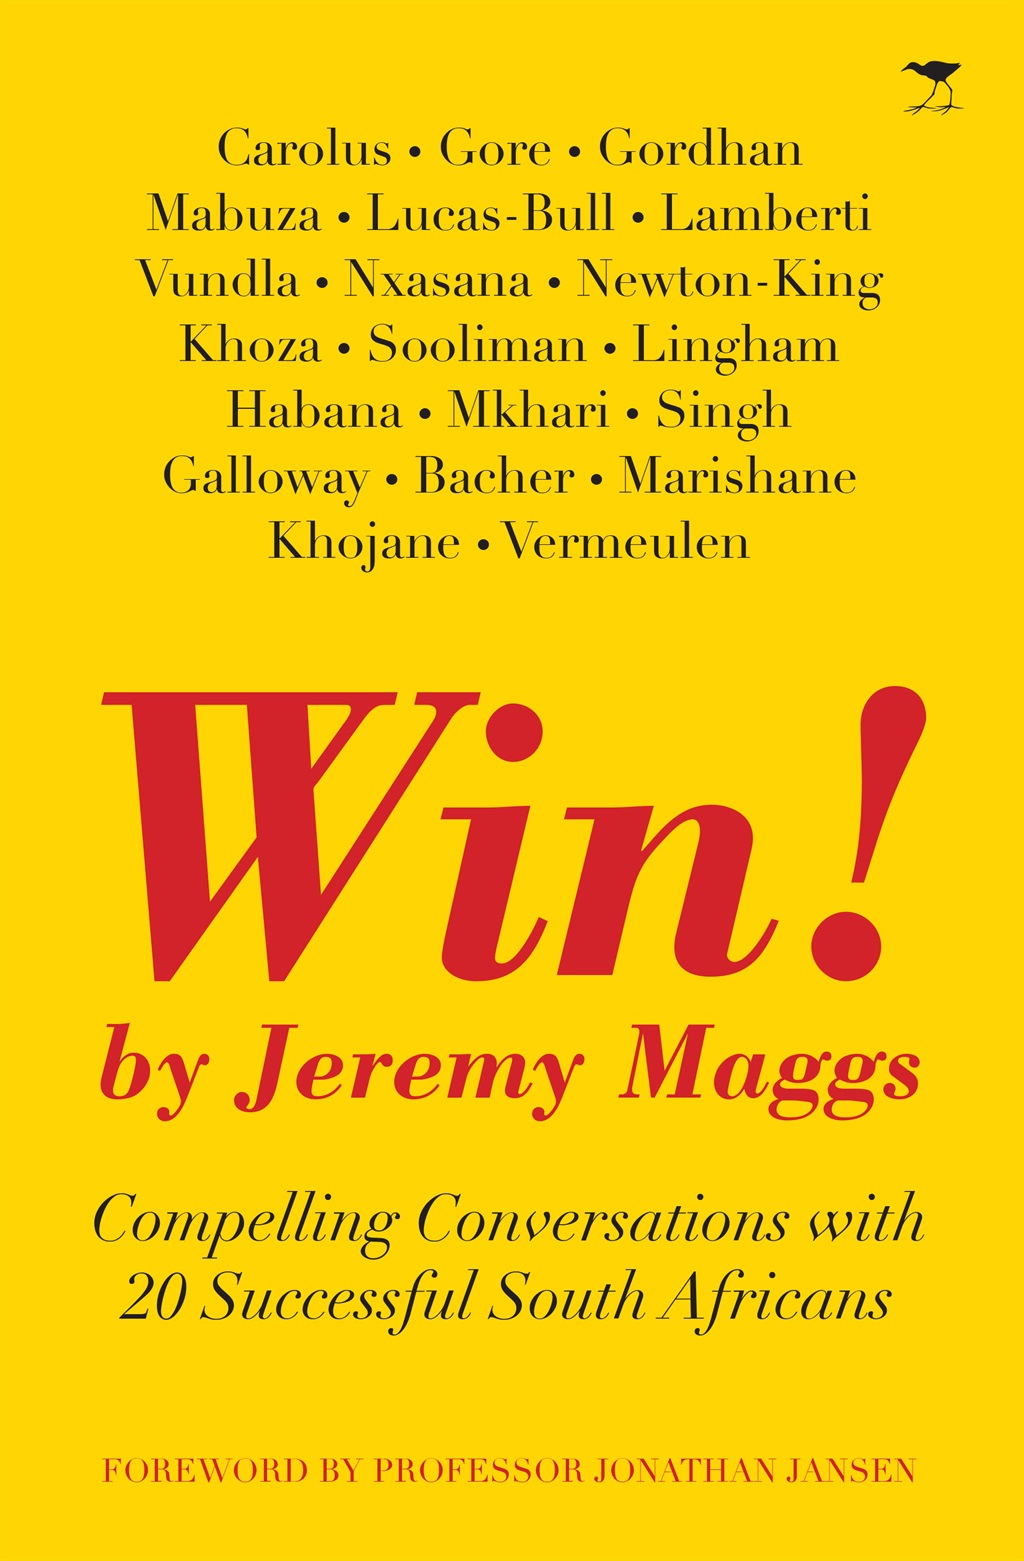 Win! Compelling Conversations with 20 Successful South Africans by Jeremy Maggs is published by Jacana Media, and is available in all good bookstores at a recommended retail price of R240